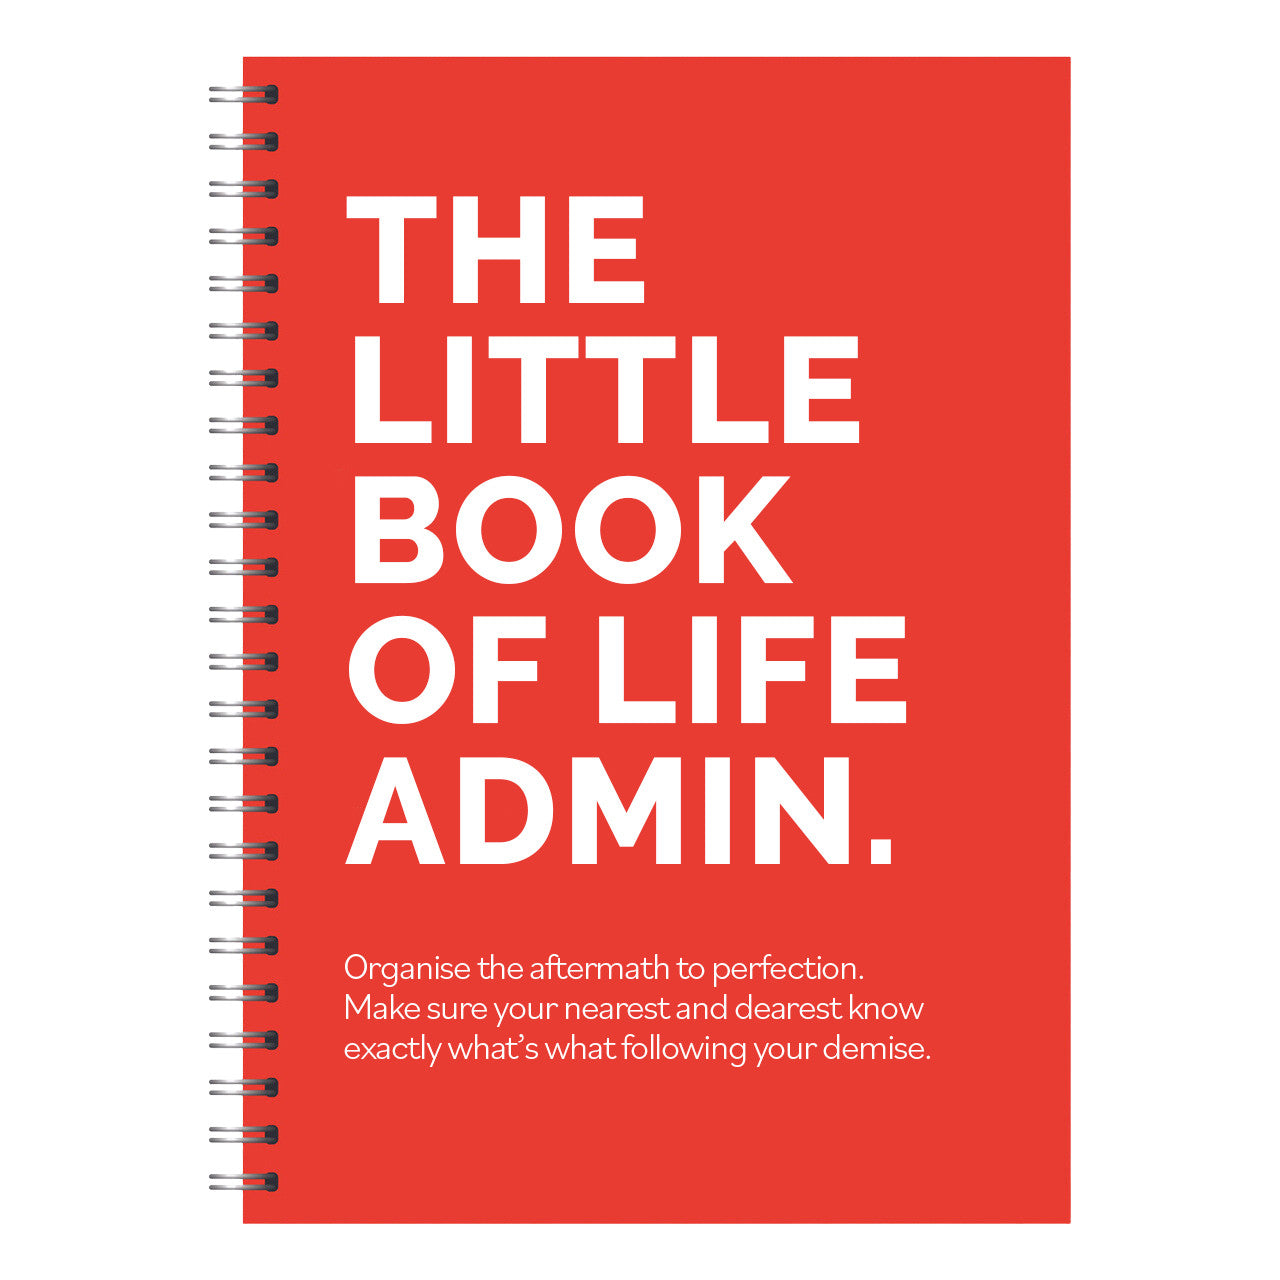 The Little Book of Life Admin (The Death Book)